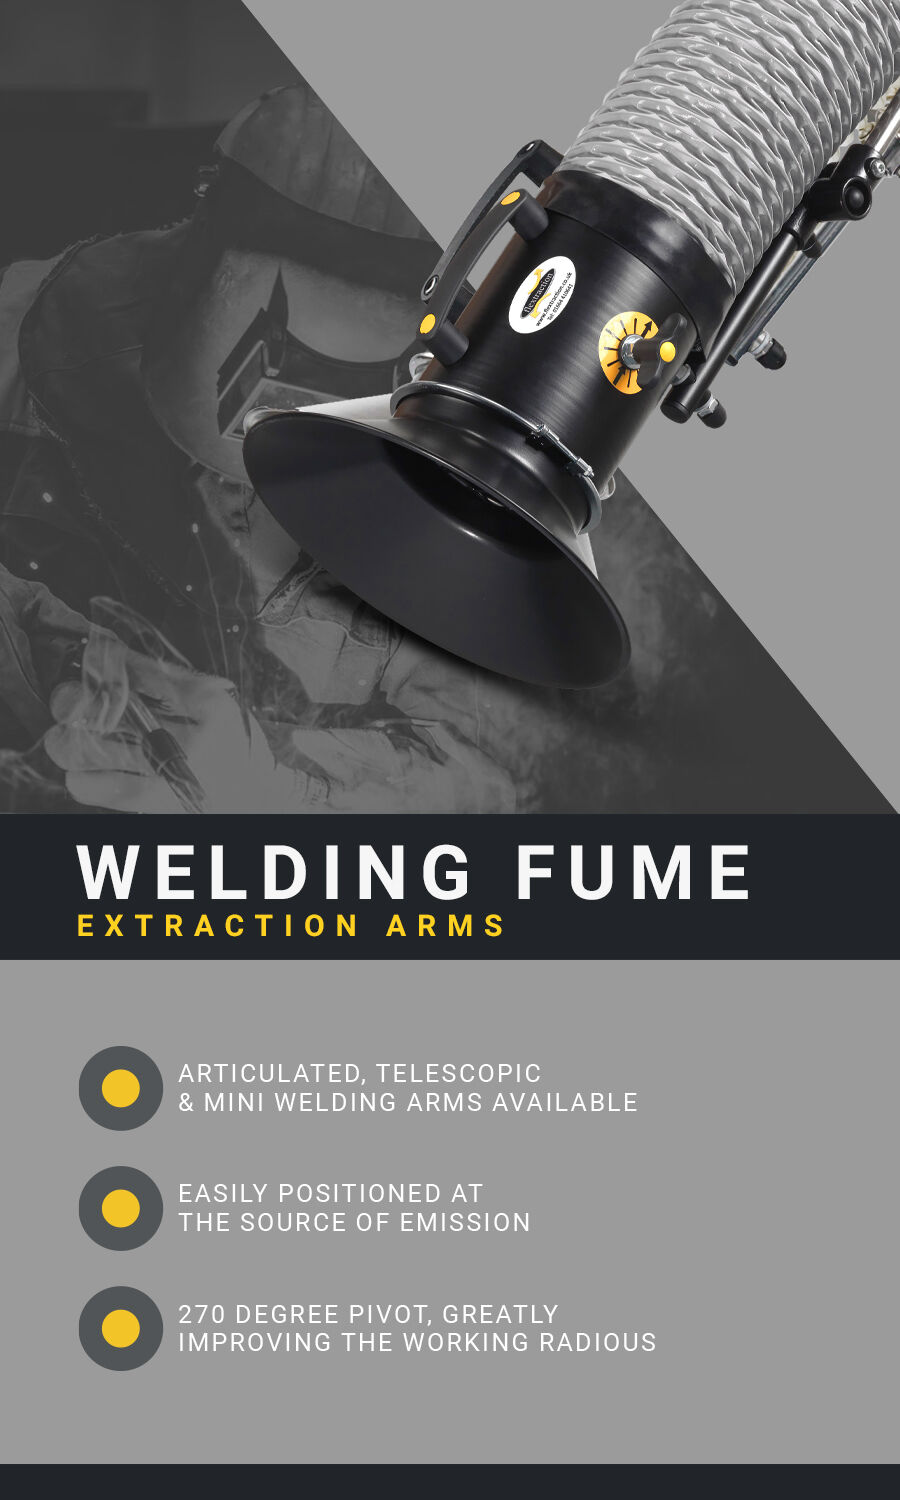 Welding smoke and fume extraction arm flextraction landing page banner